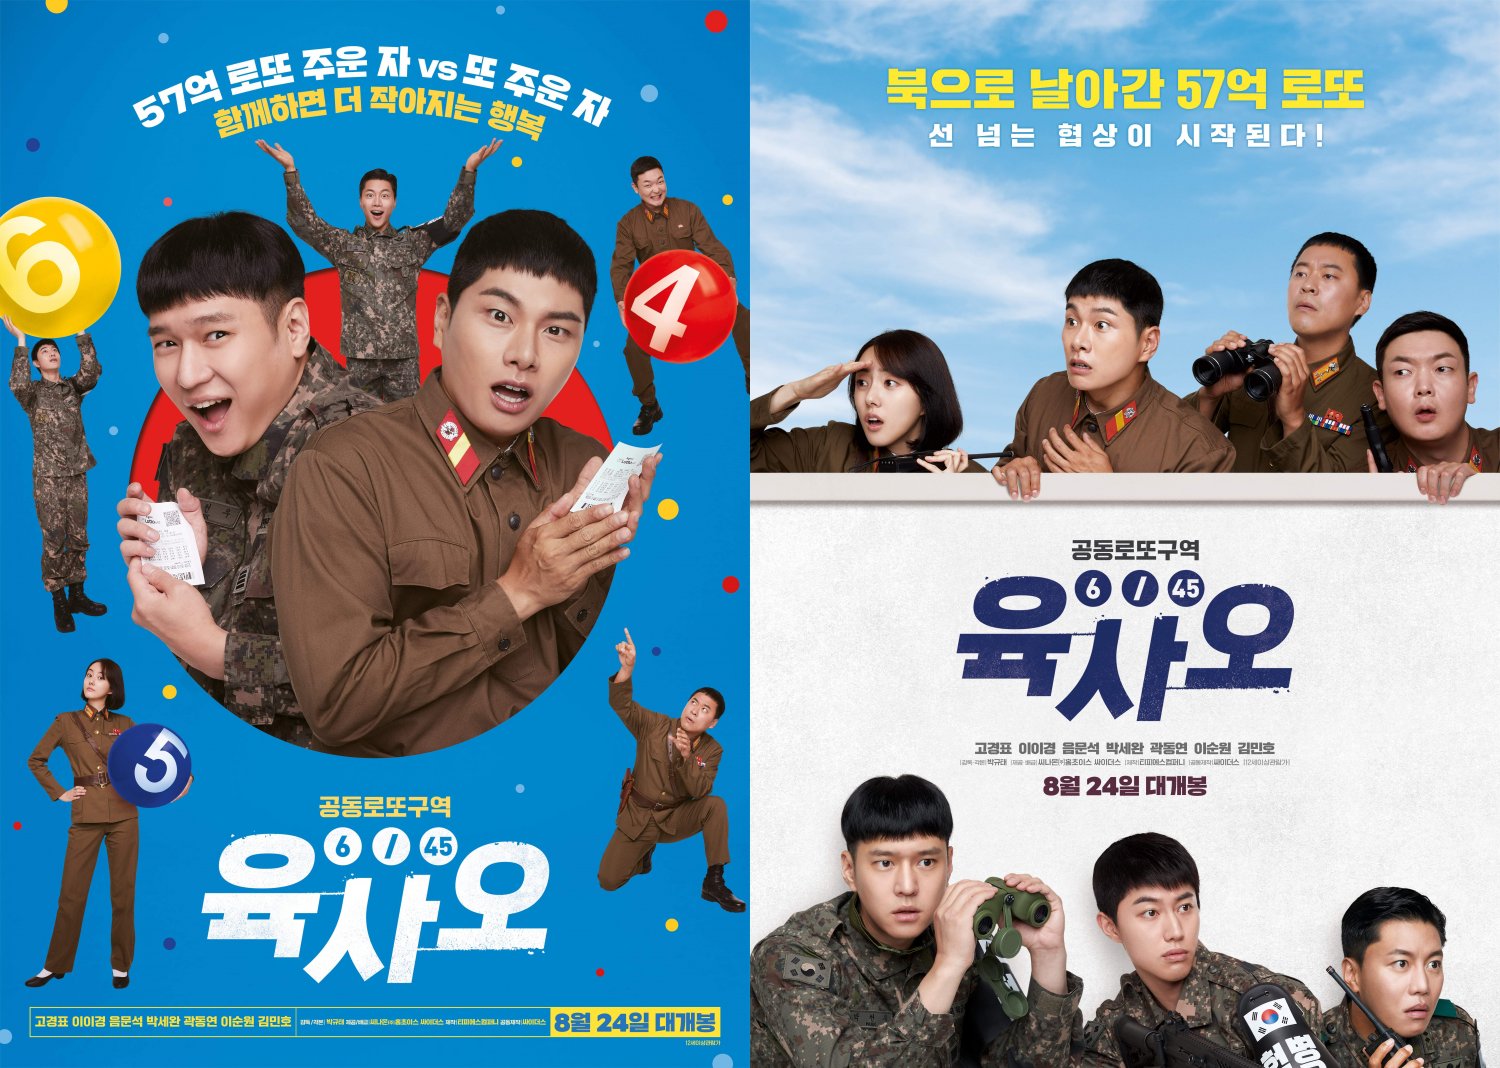 [Photos + Video] New Posters and Trailer Added for the Upcoming Korean